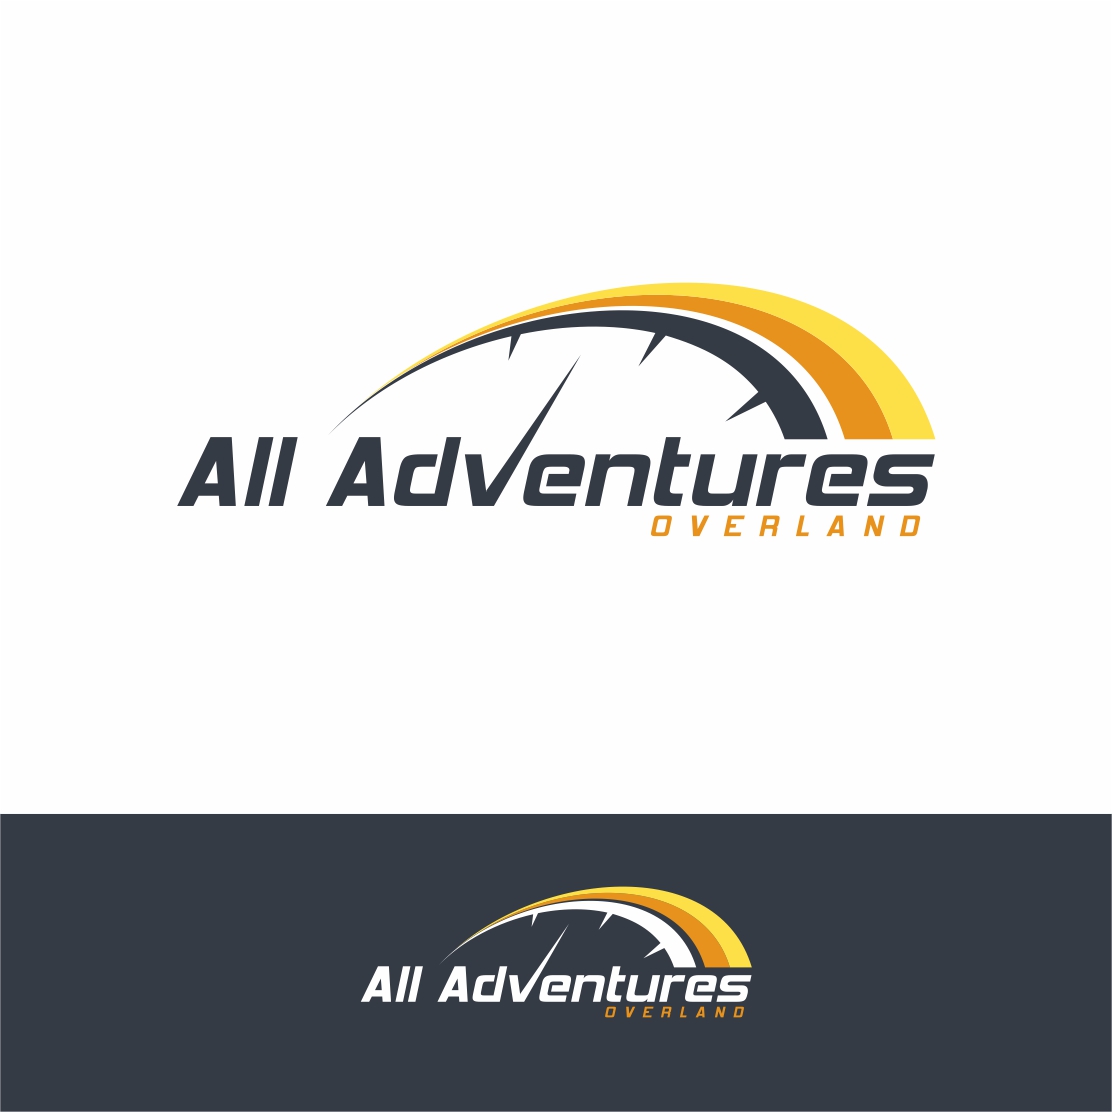 Speedometer logo design land adventure logo abstract symbol - only 5$ preview image.